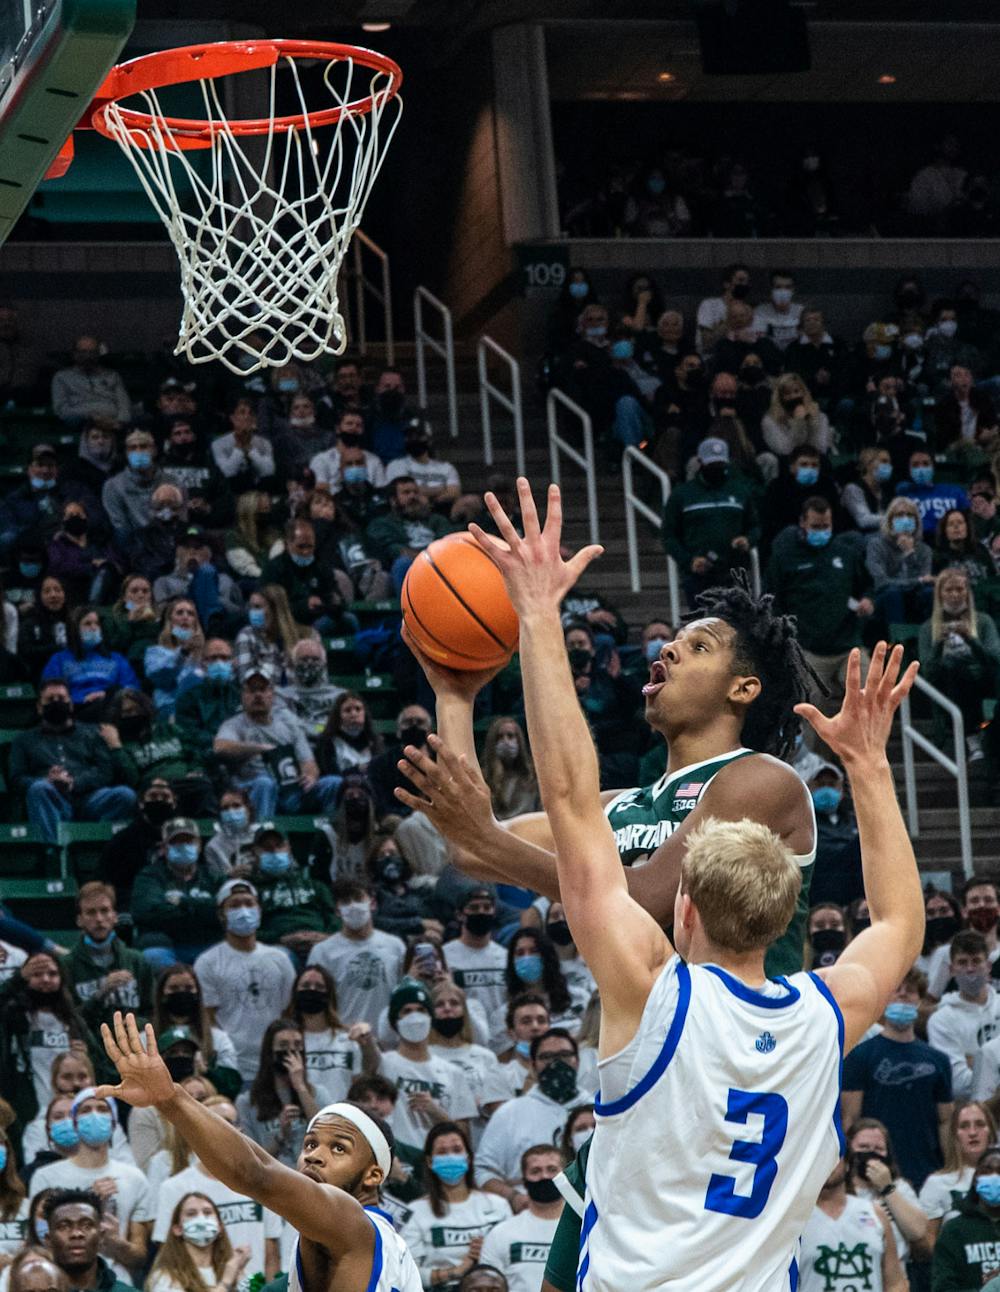 <p>Sophomore guard A.J. Hoggard (11) flies up to the net to score against Grand Valley in the second half. The Spartans beat the Lakers, 83-60, in a home exhibition game on Nov. 4, 2021.</p>